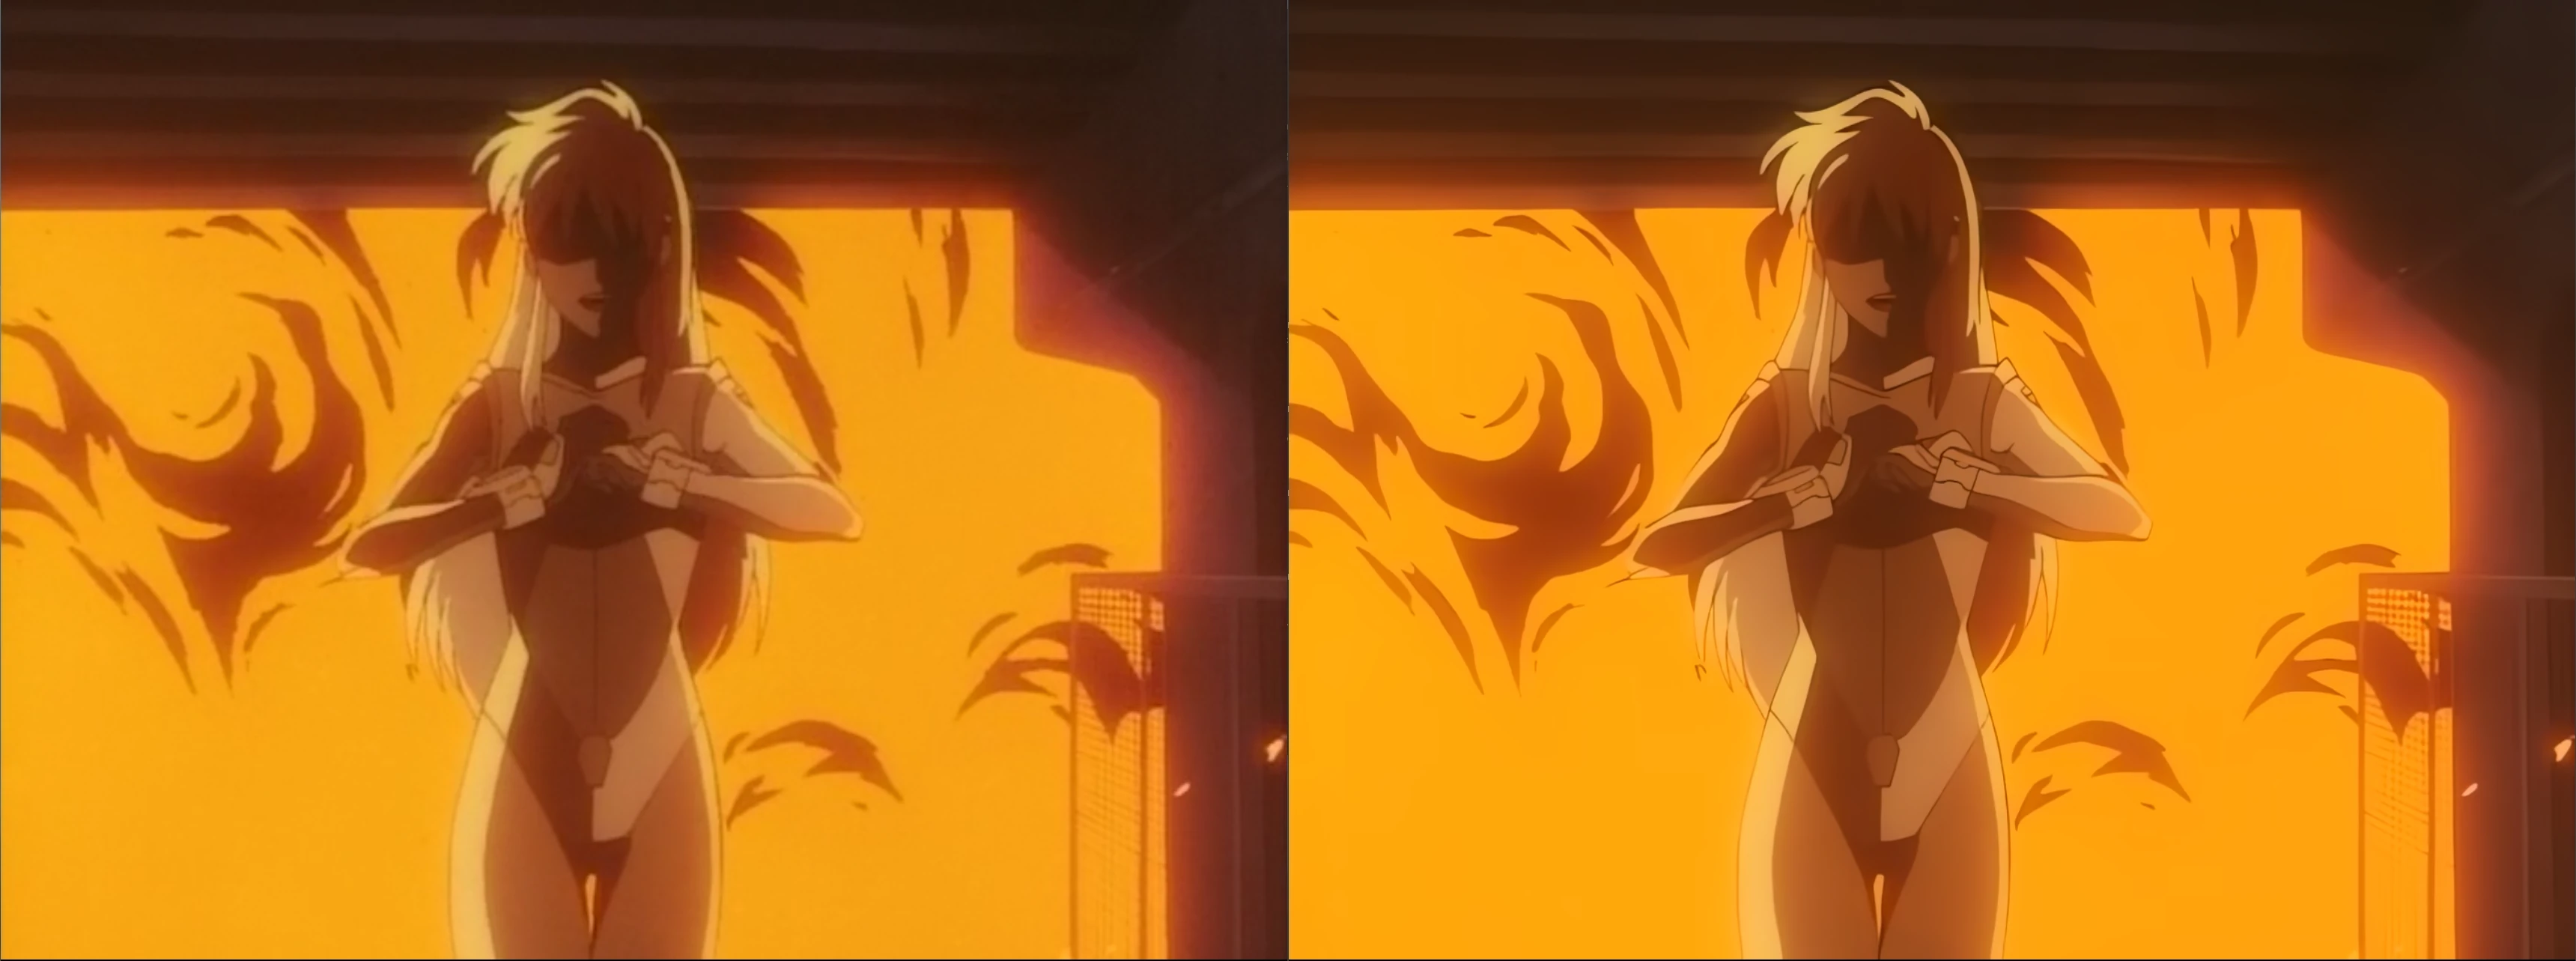 Blurry, noisy shot of birdy stepping out of a fire and cracking her knuckles on left. On the right is the same frame but much sharper, almost without noise. The sharpness does however emphasize some slight artifacts on the original rip, making the image look more artificial.